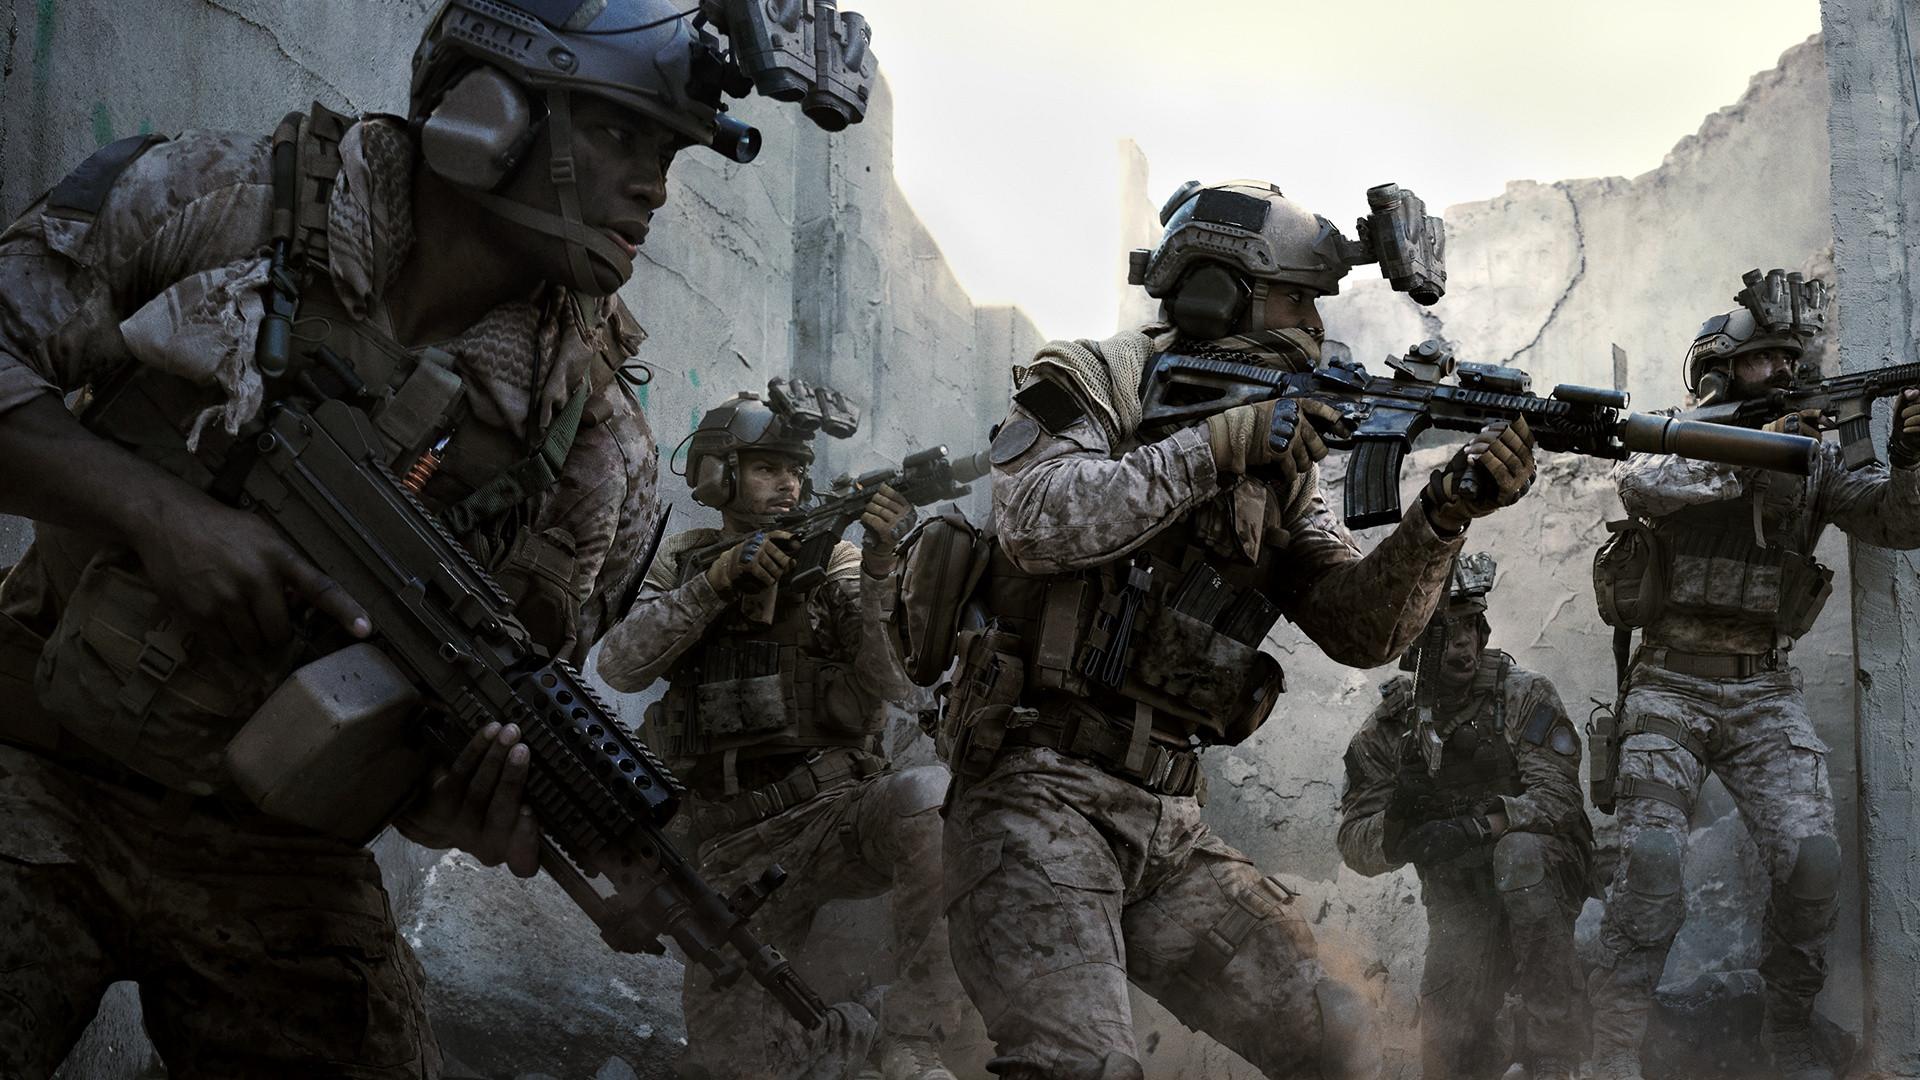 Call of Duty: Modern Warfare Multiplayer Premiere Reveal is Live